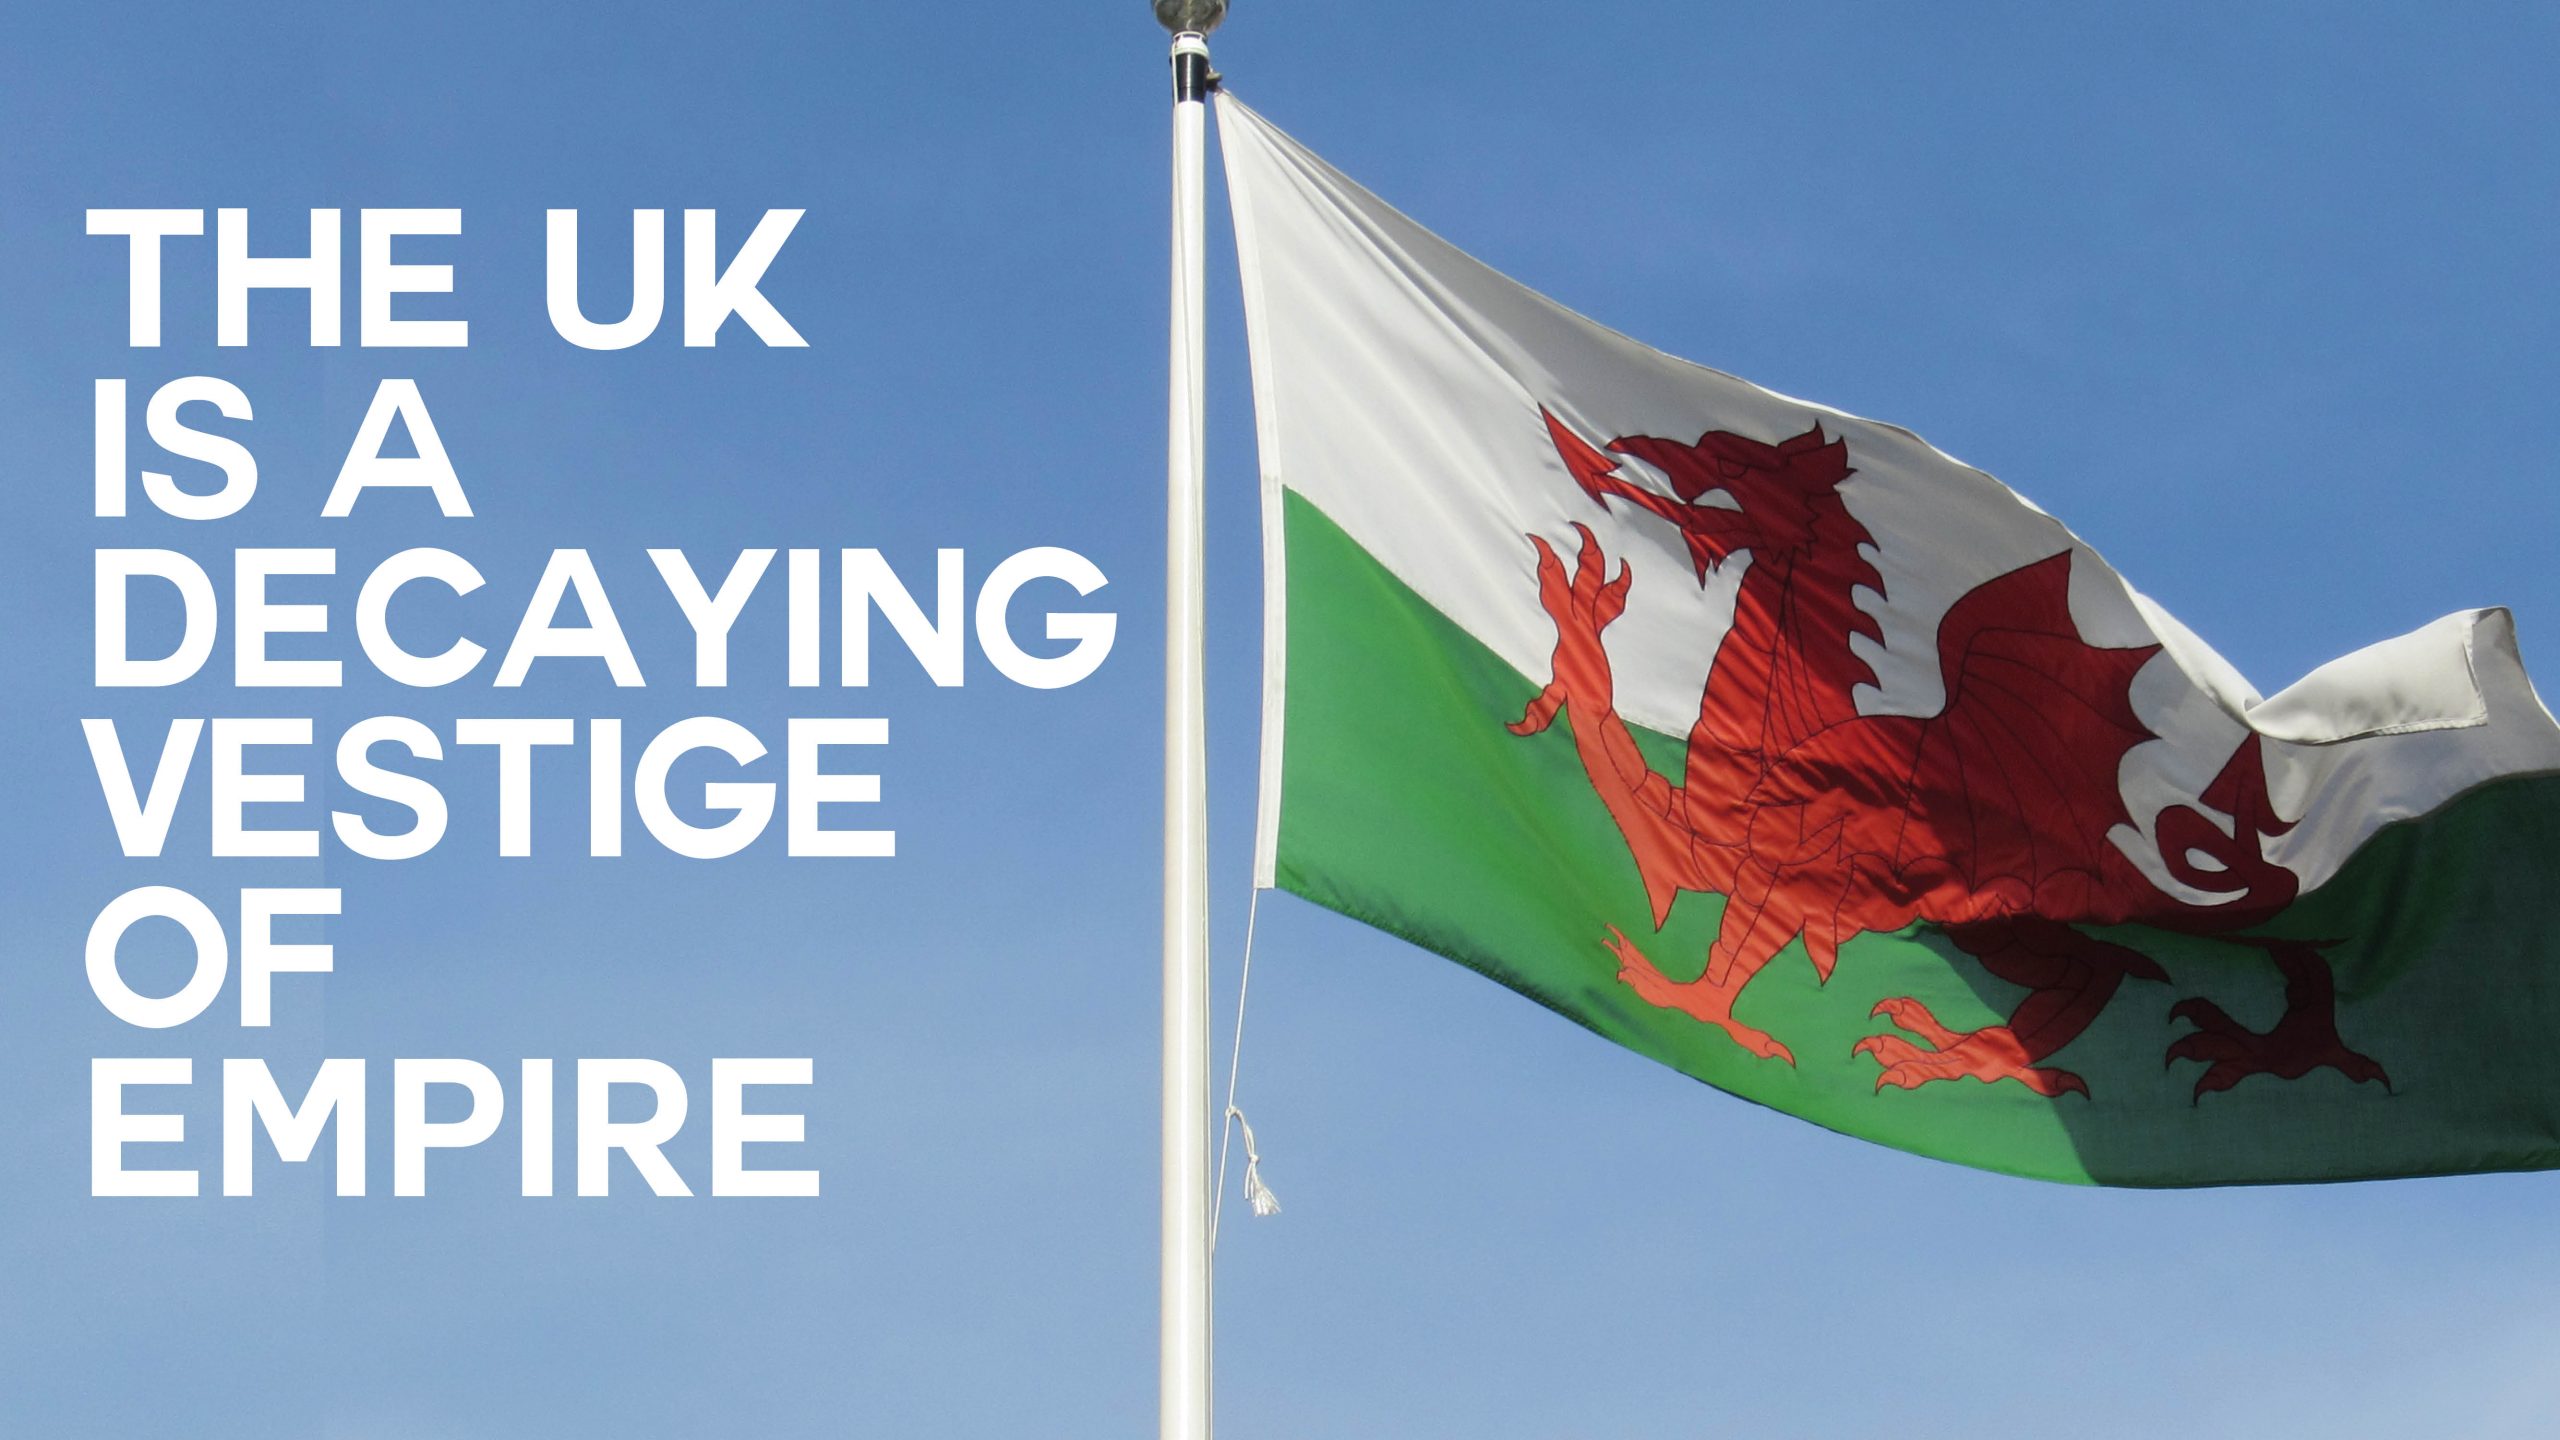 A photo of a Welsh flag with text overlaid reading "The UK is a decaying vestige of empire"